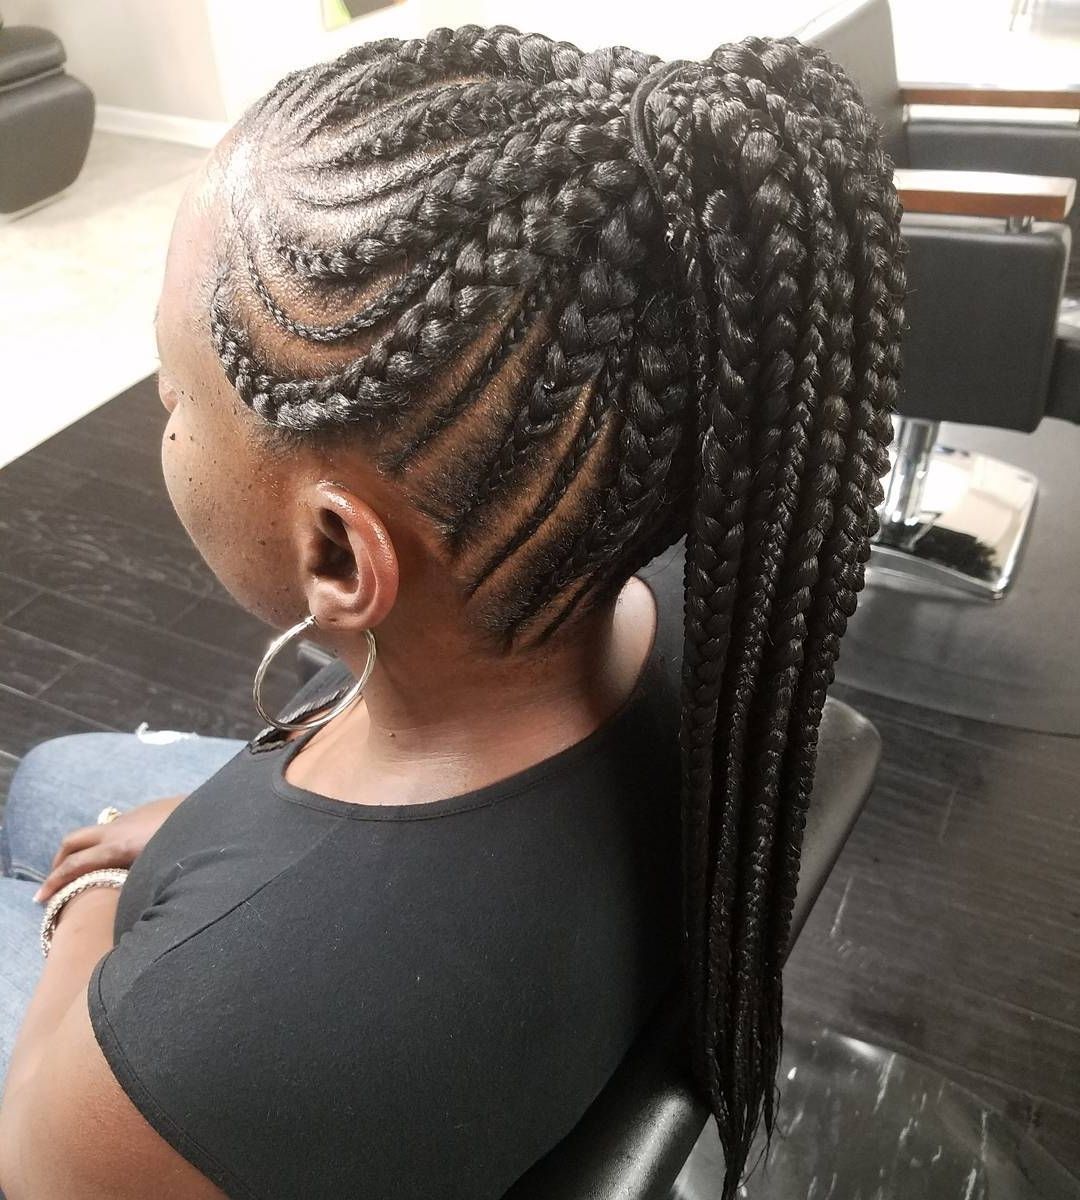 20 Gorgeous Ghana Braids For An Intricate Hairdo In 2018 Regarding Famous Long Curvy Braids Hairstyles (View 4 of 15)